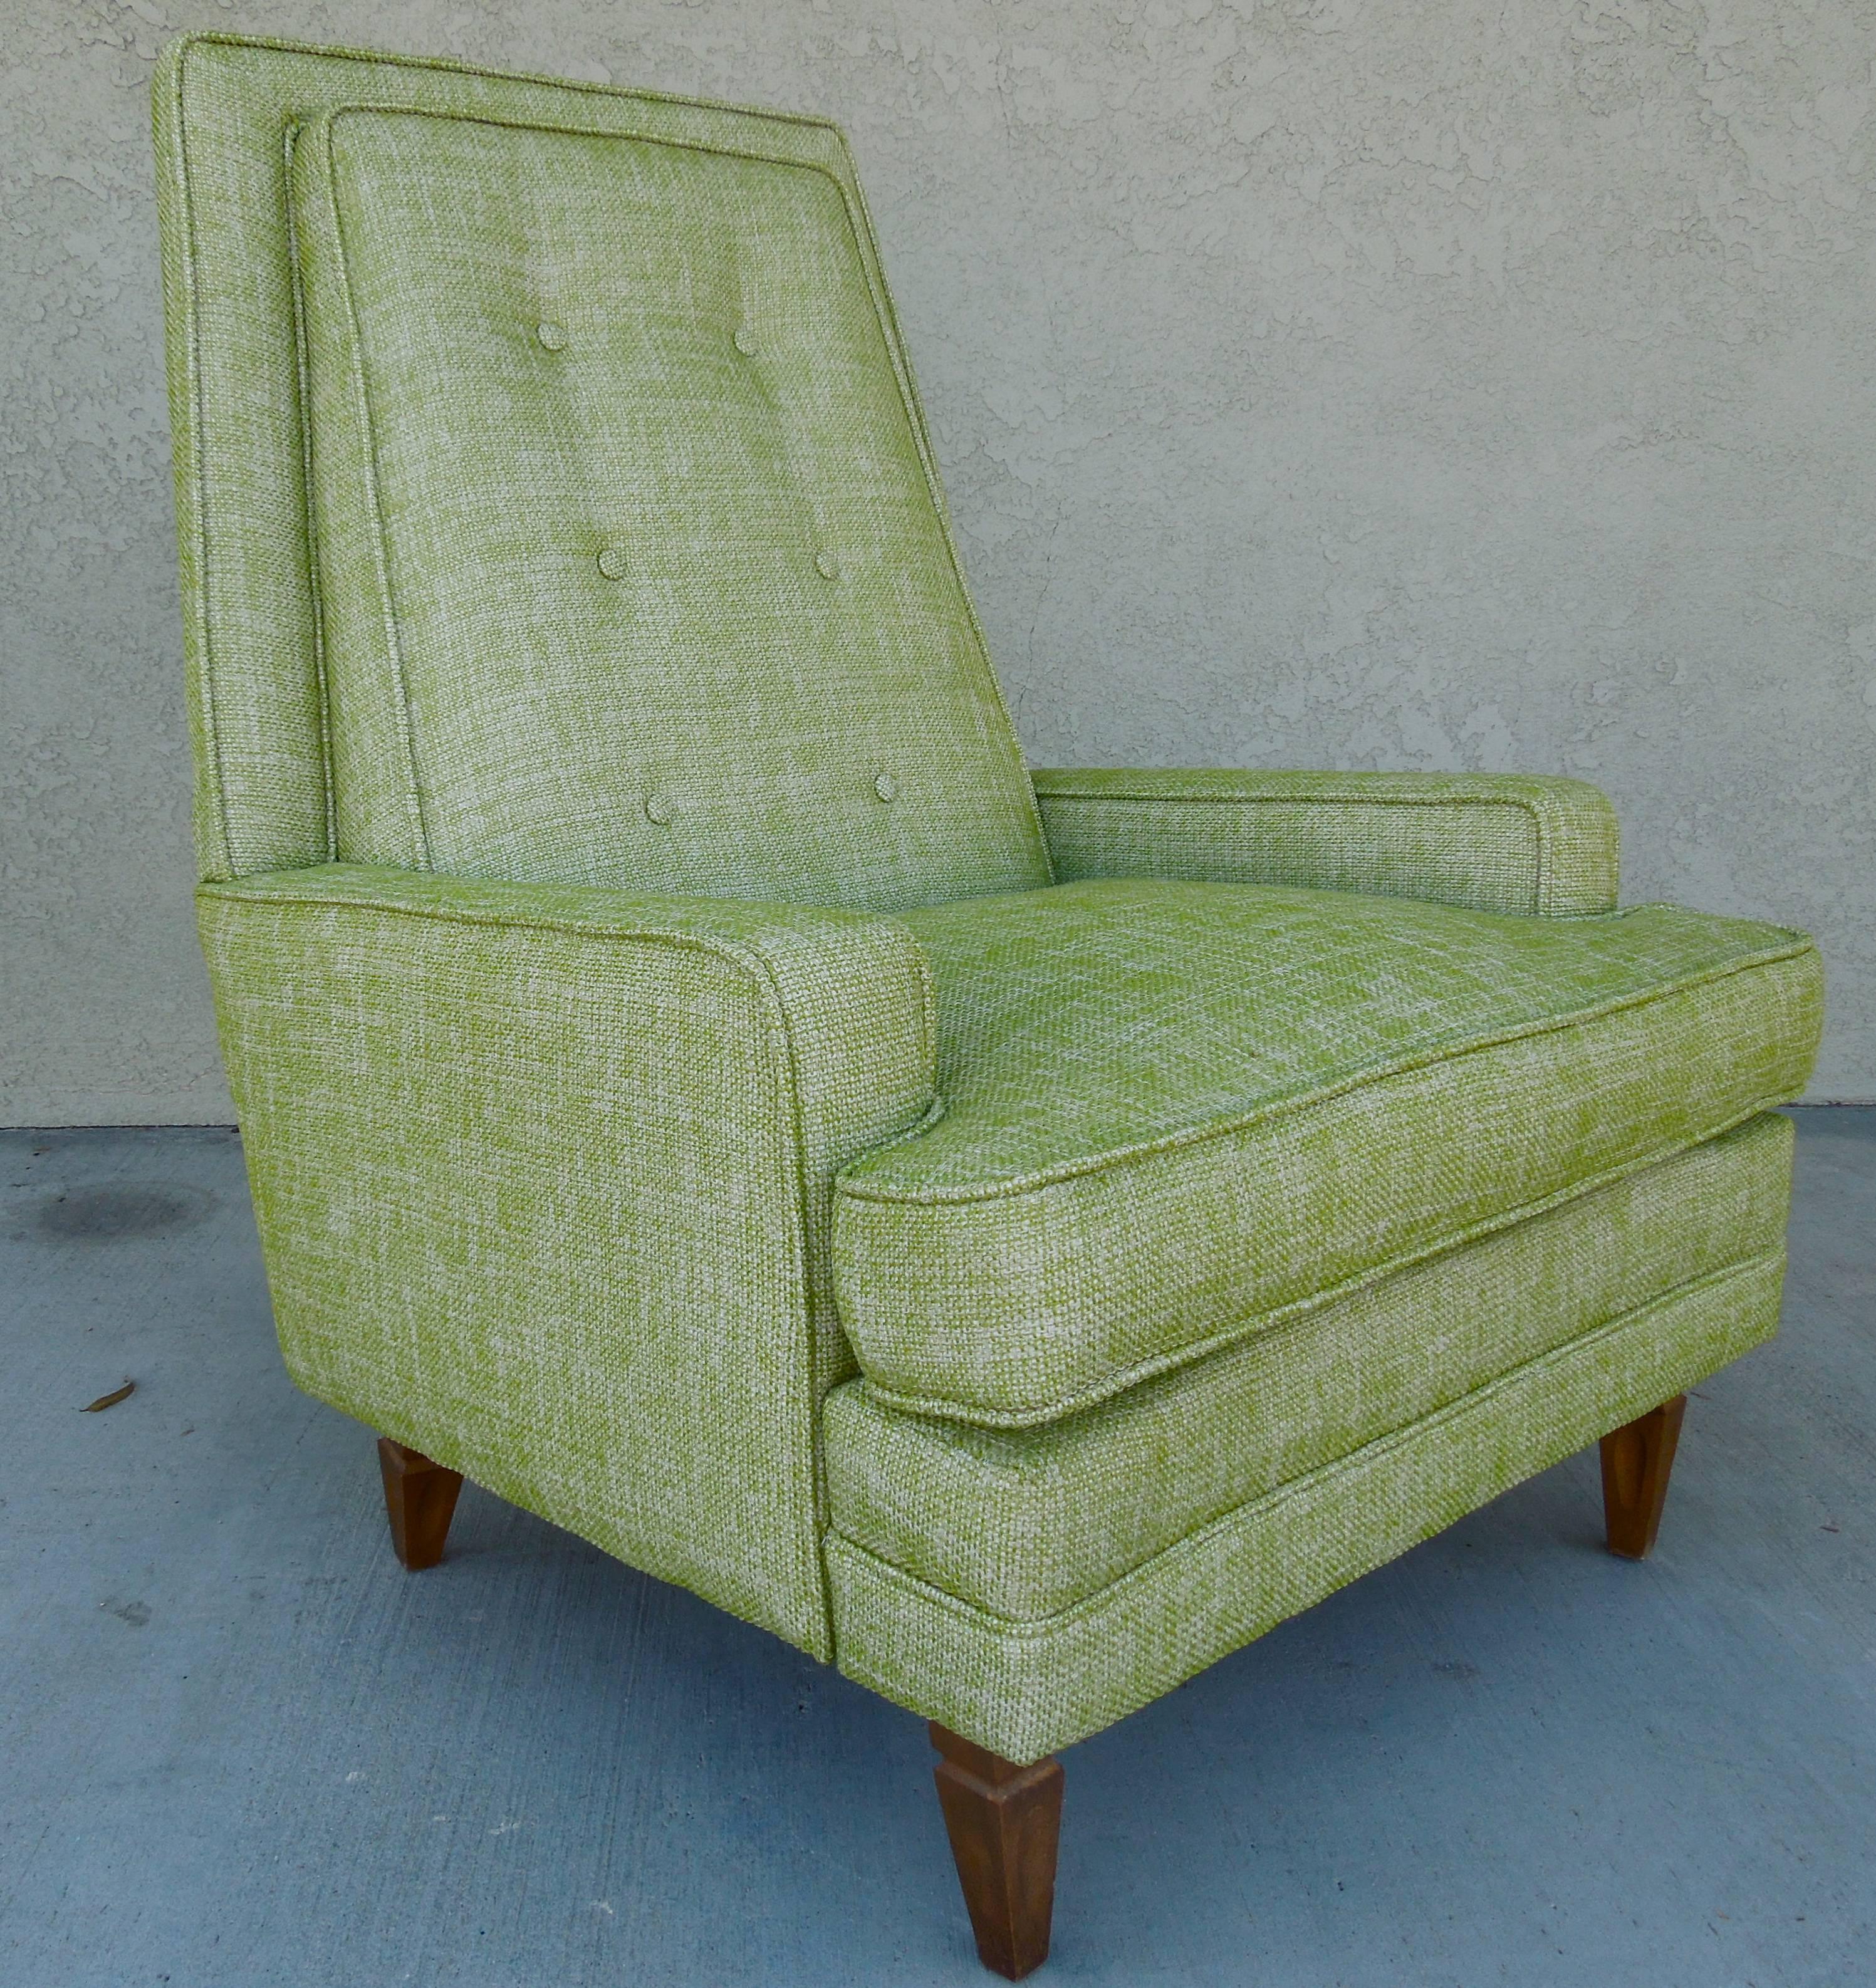 Mid-20th Century 1960s Modern Tailored Armchair in New High End Lime Linen Tweed Fabric